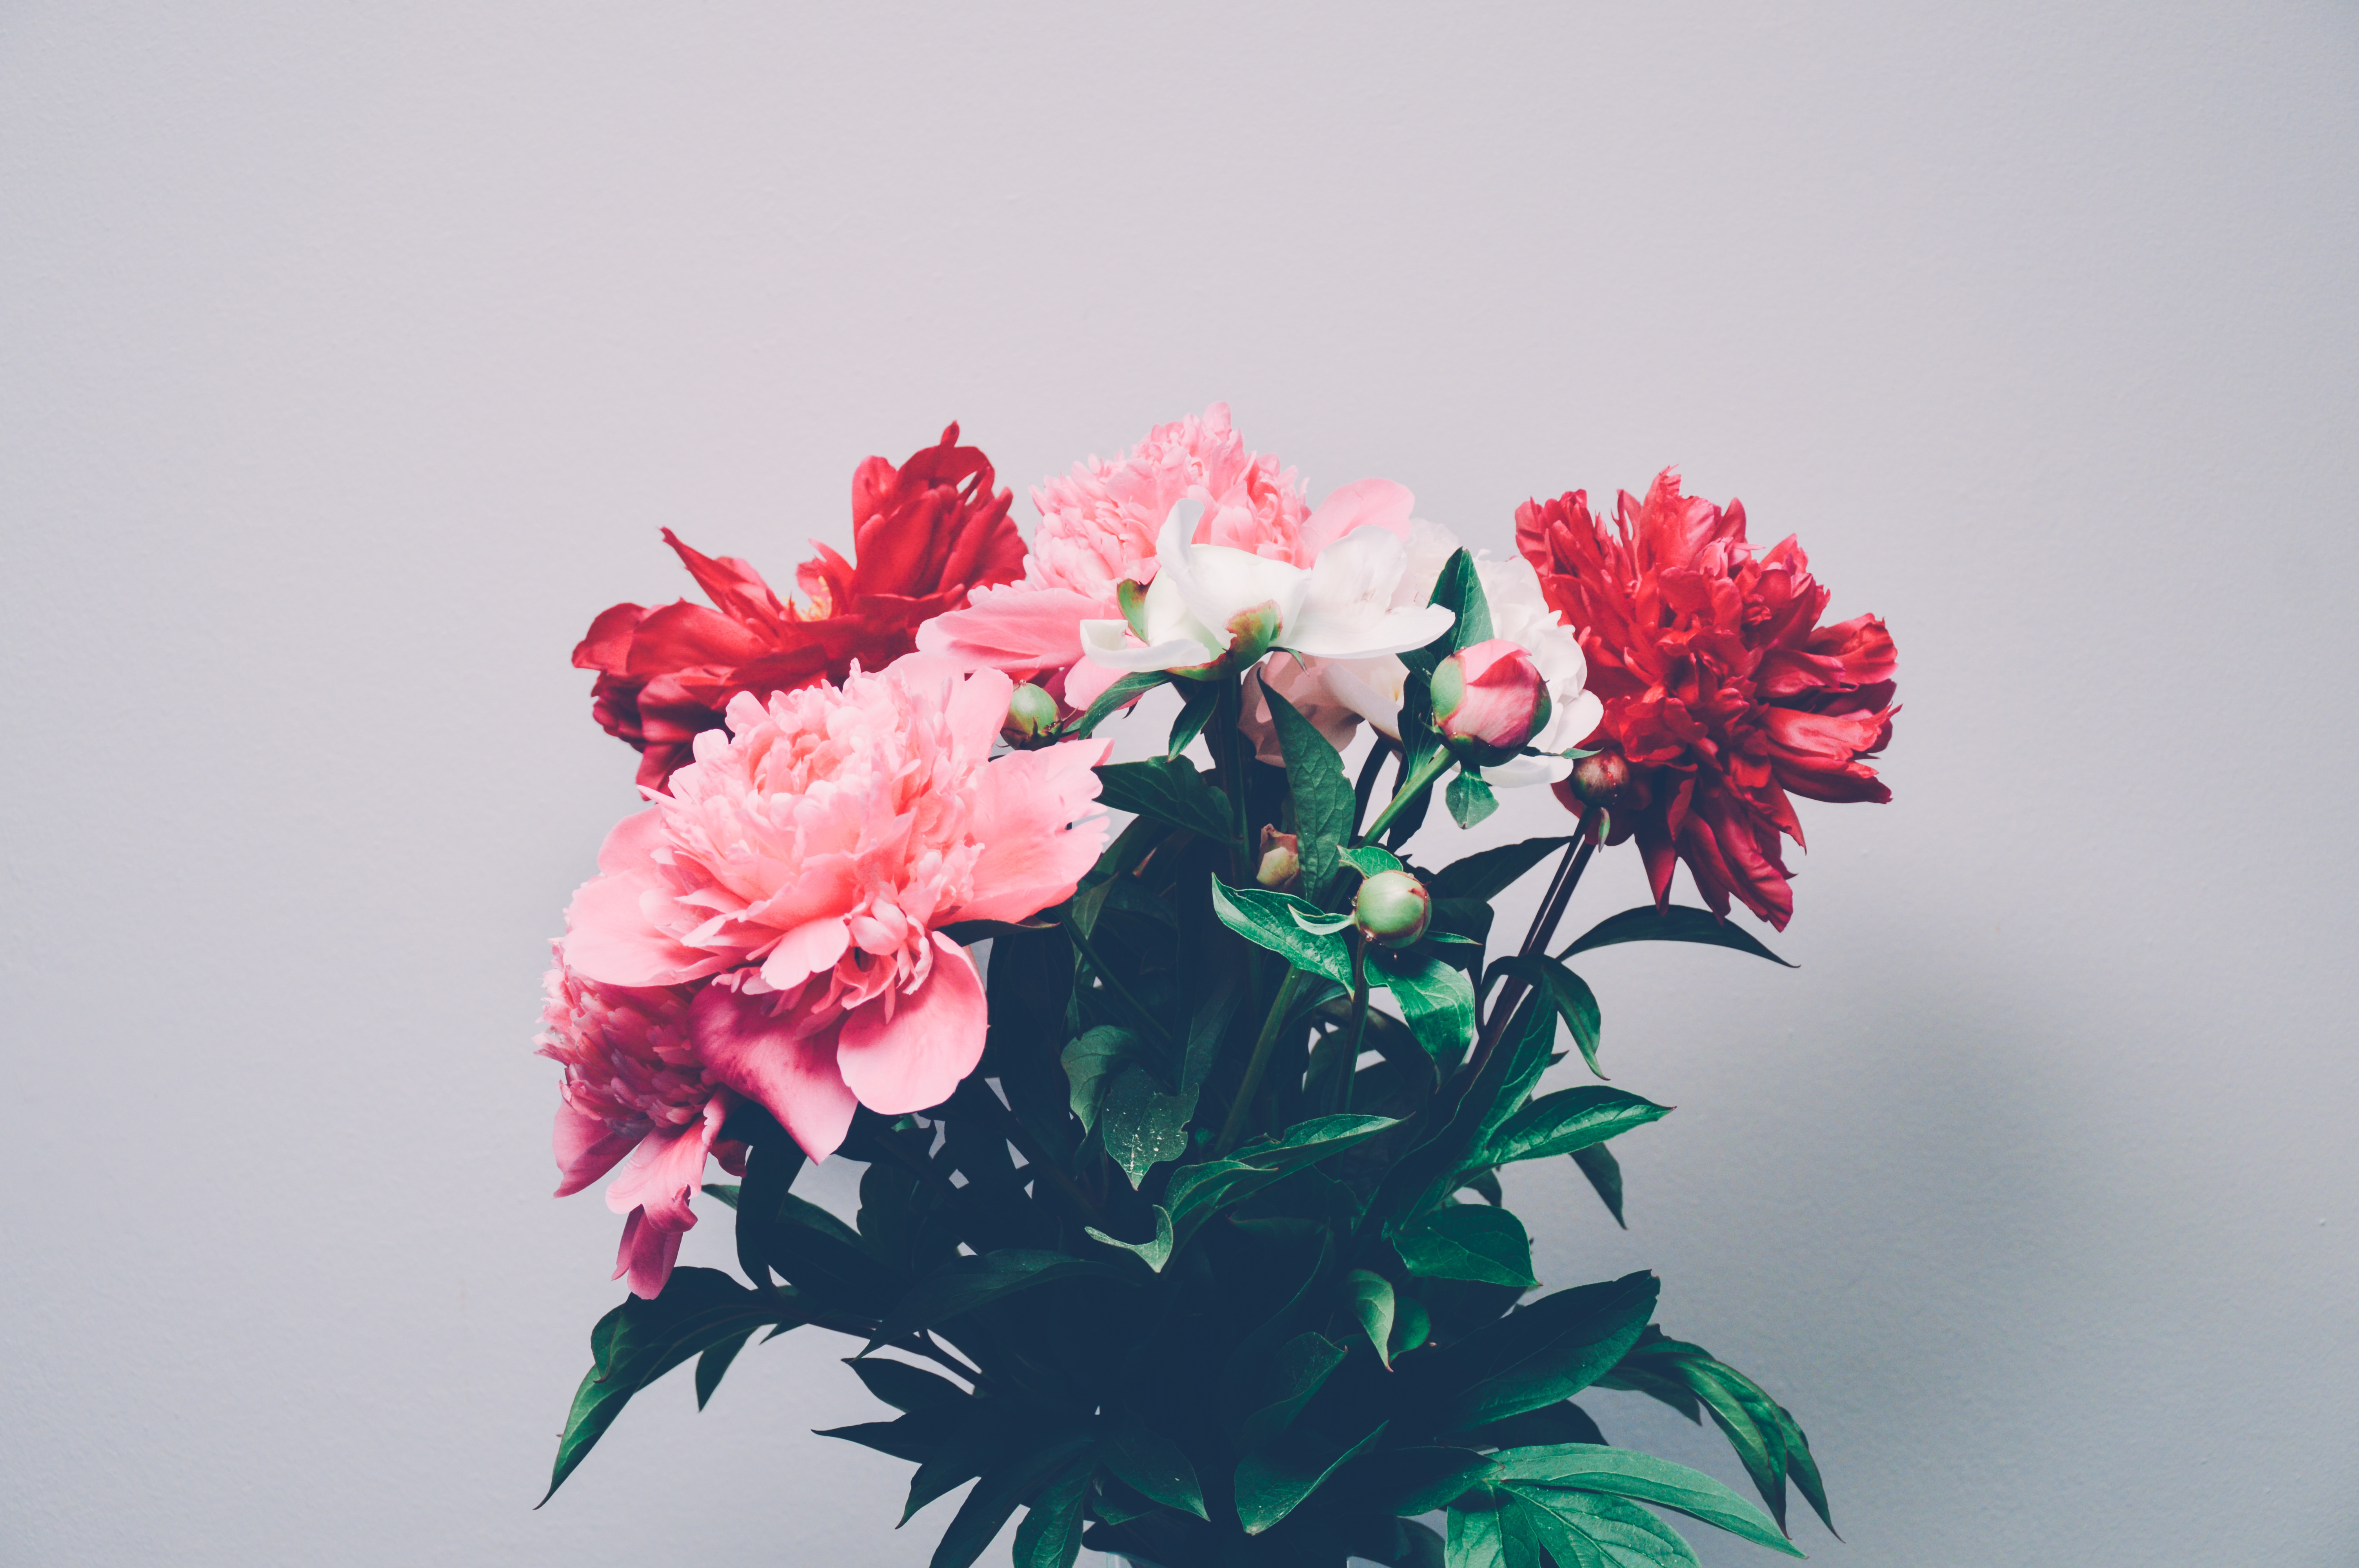 pink and red petaled flowers